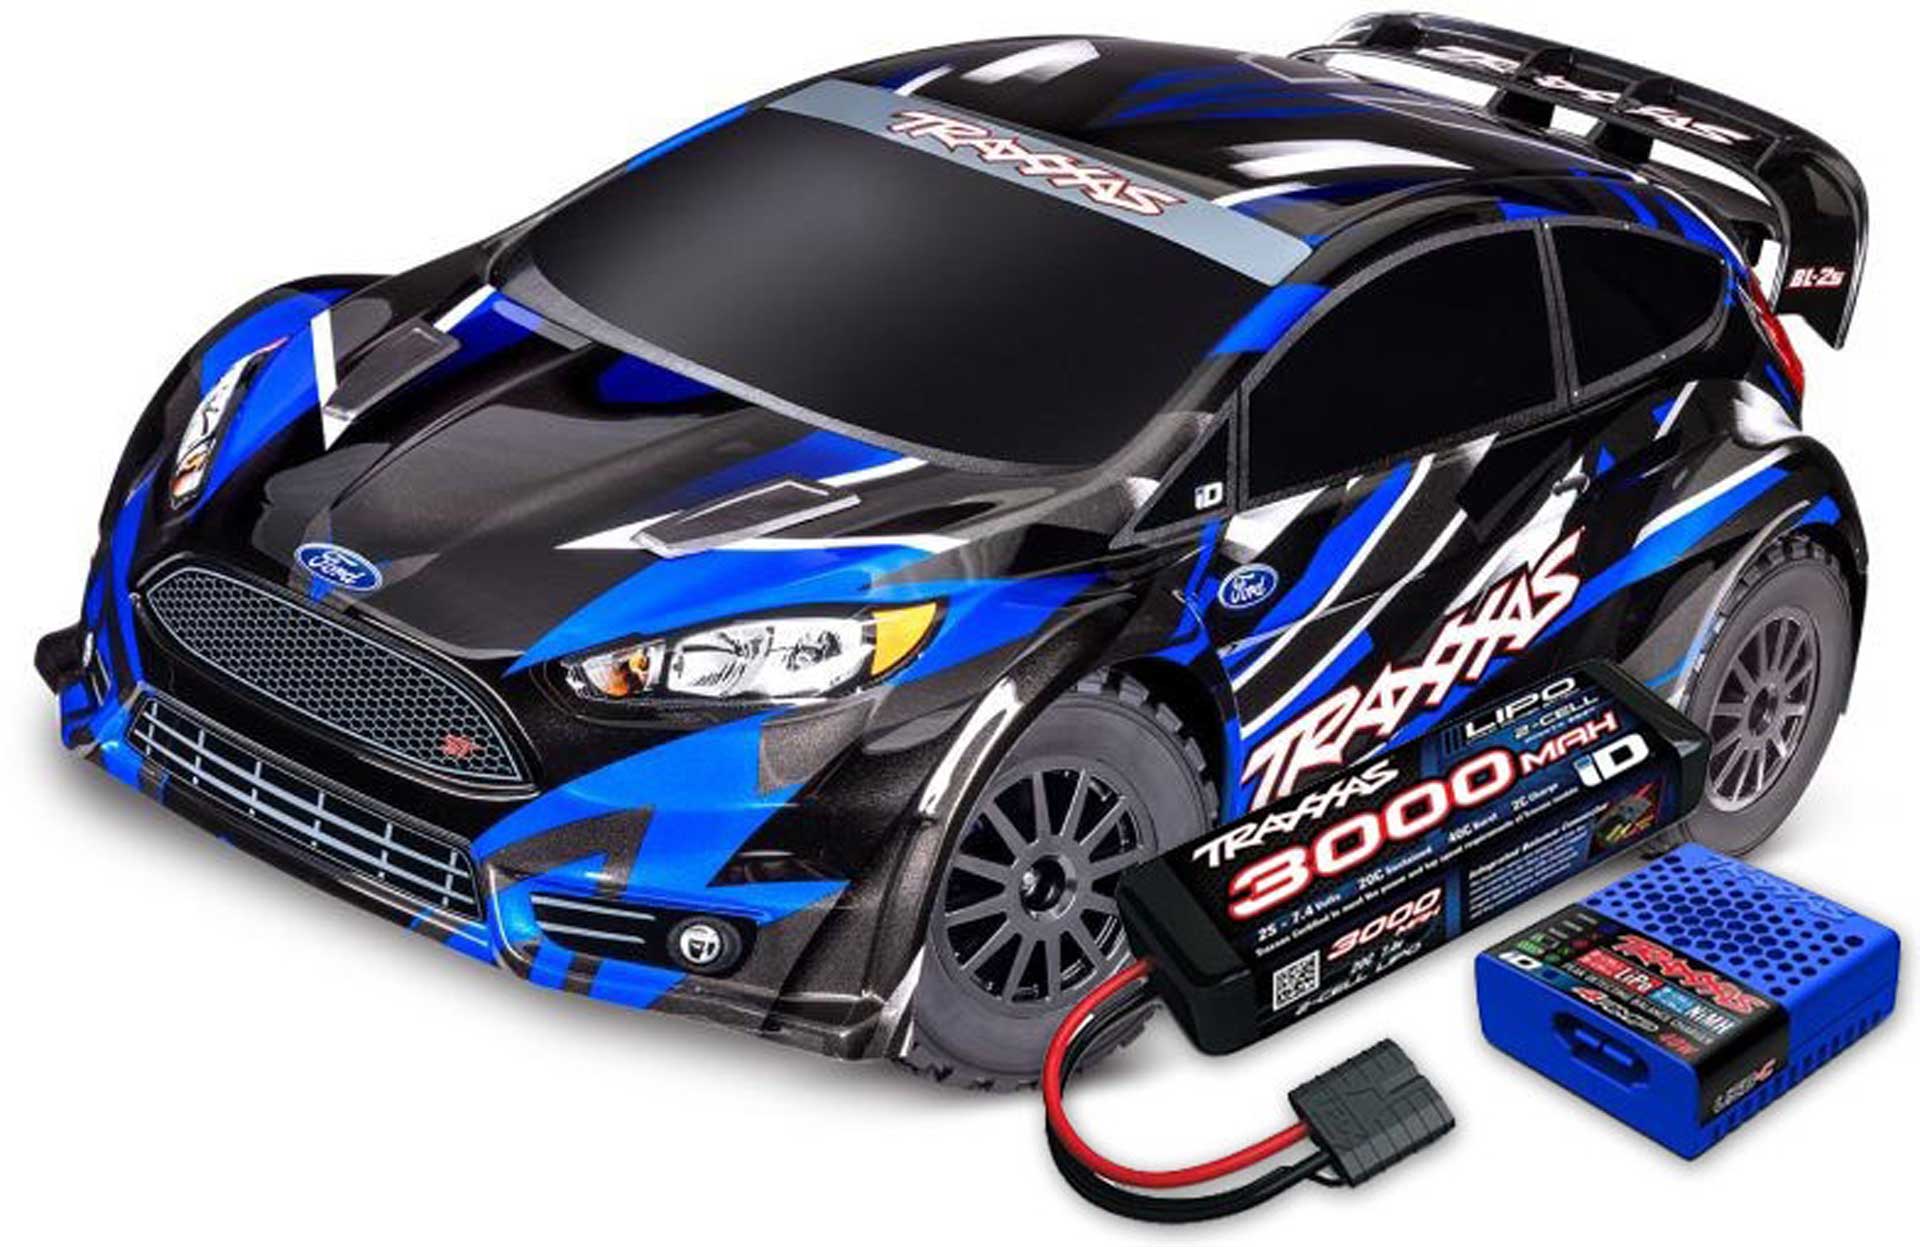 TRAXXAS FORD FIESTA ST 4X4 BL-2S BLUE 1/10 RALLY RTR BL-2S SET WITH FREE LIPO BATTERY AND